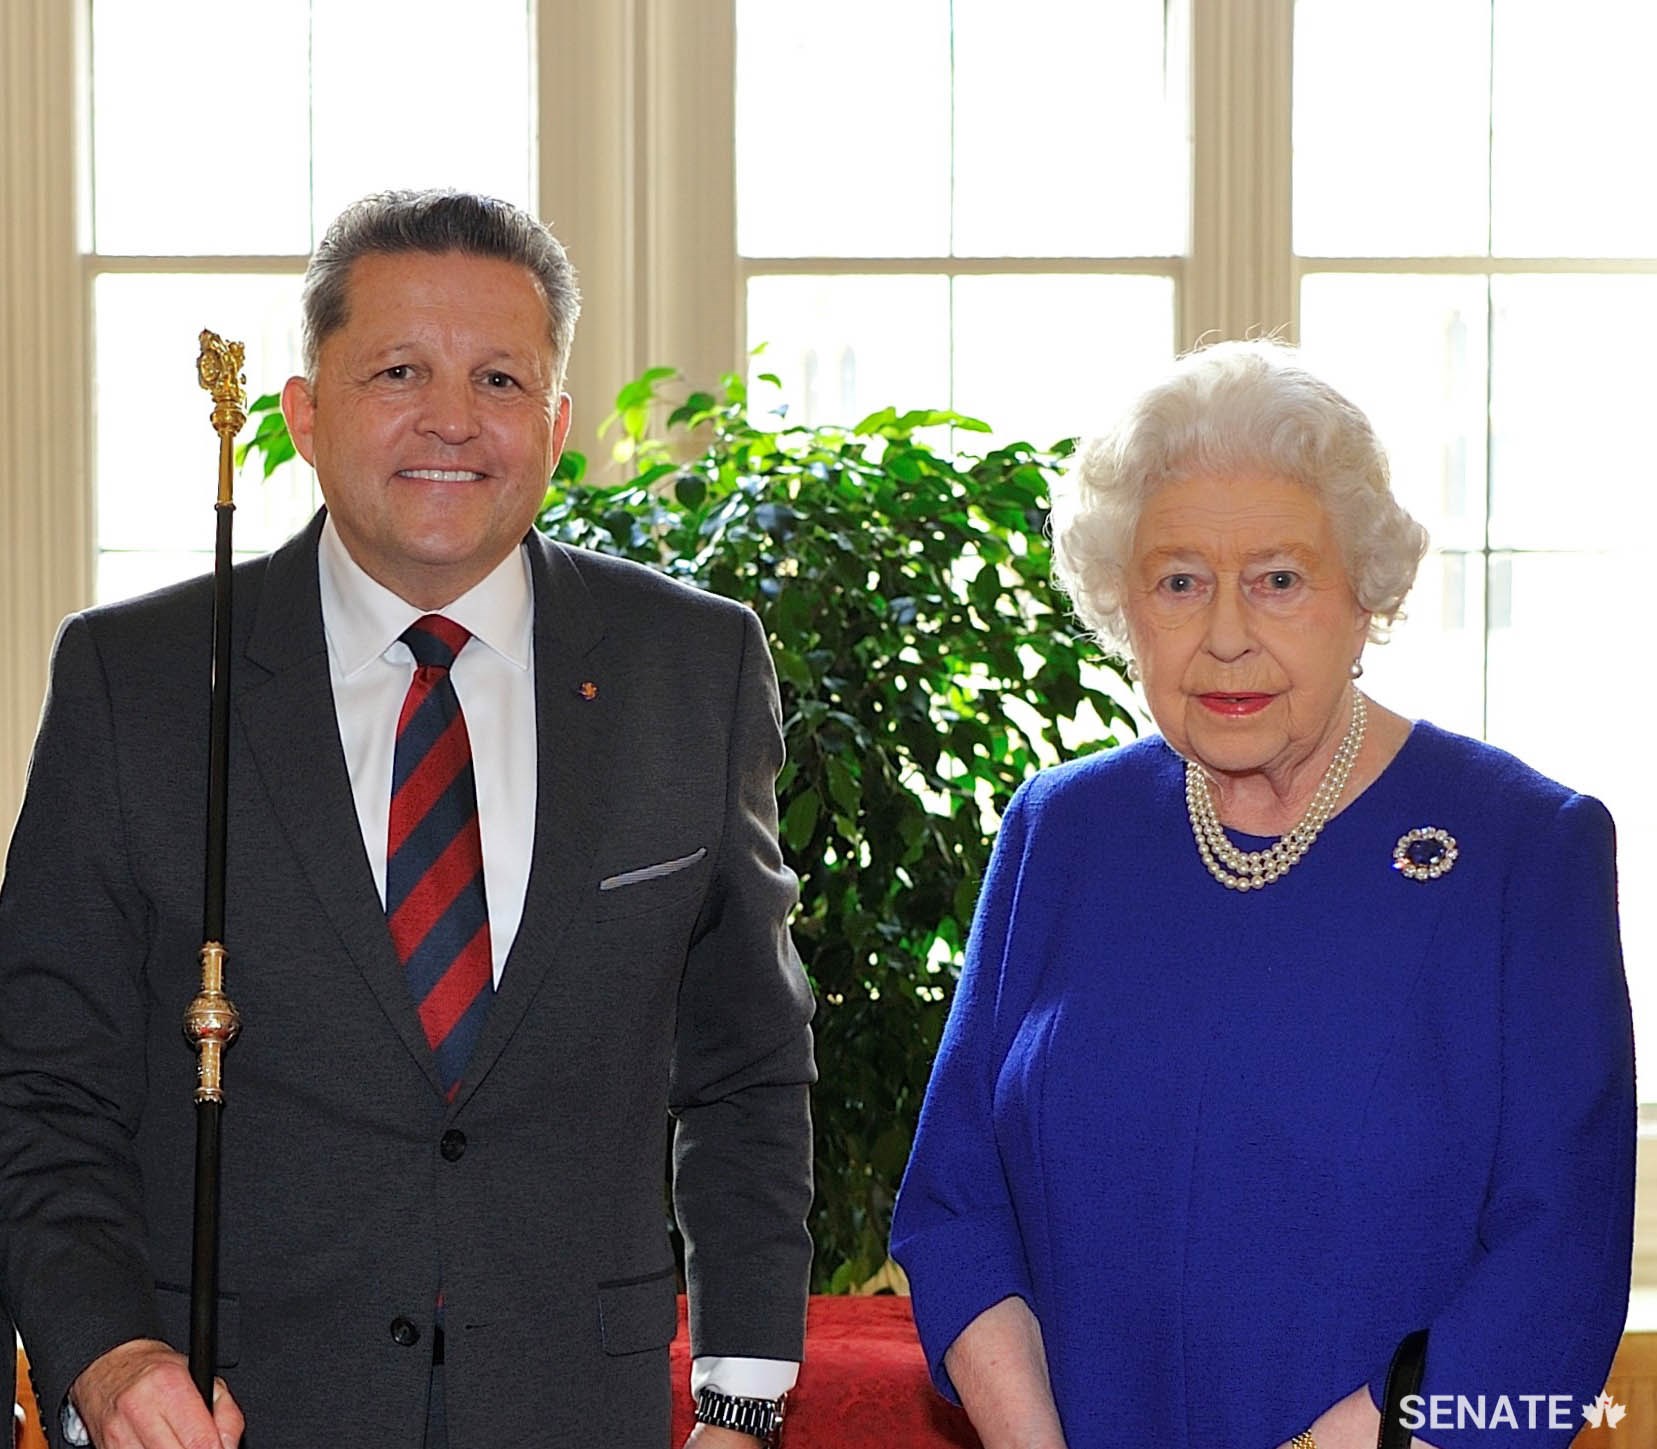 The Usher of the Black Rod, J. Greg Peters, receives the restored Black Rod from Her Majesty Queen Elizabeth II.